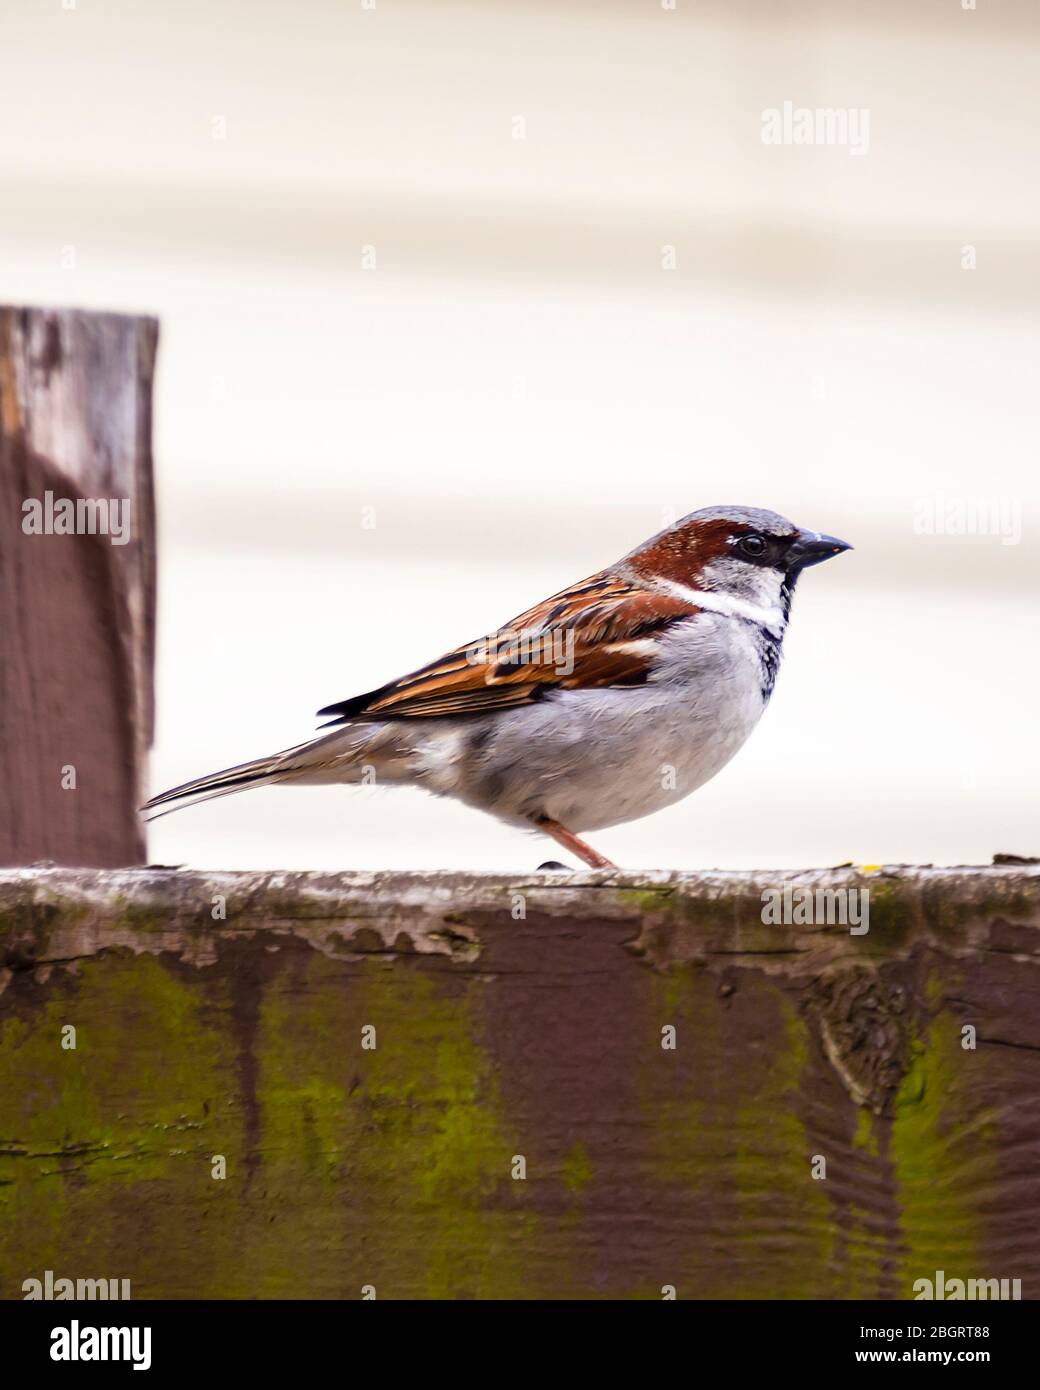 Male house sparrow with a side view.  Perched on a brown fence.  Background blurry. Stock Photo